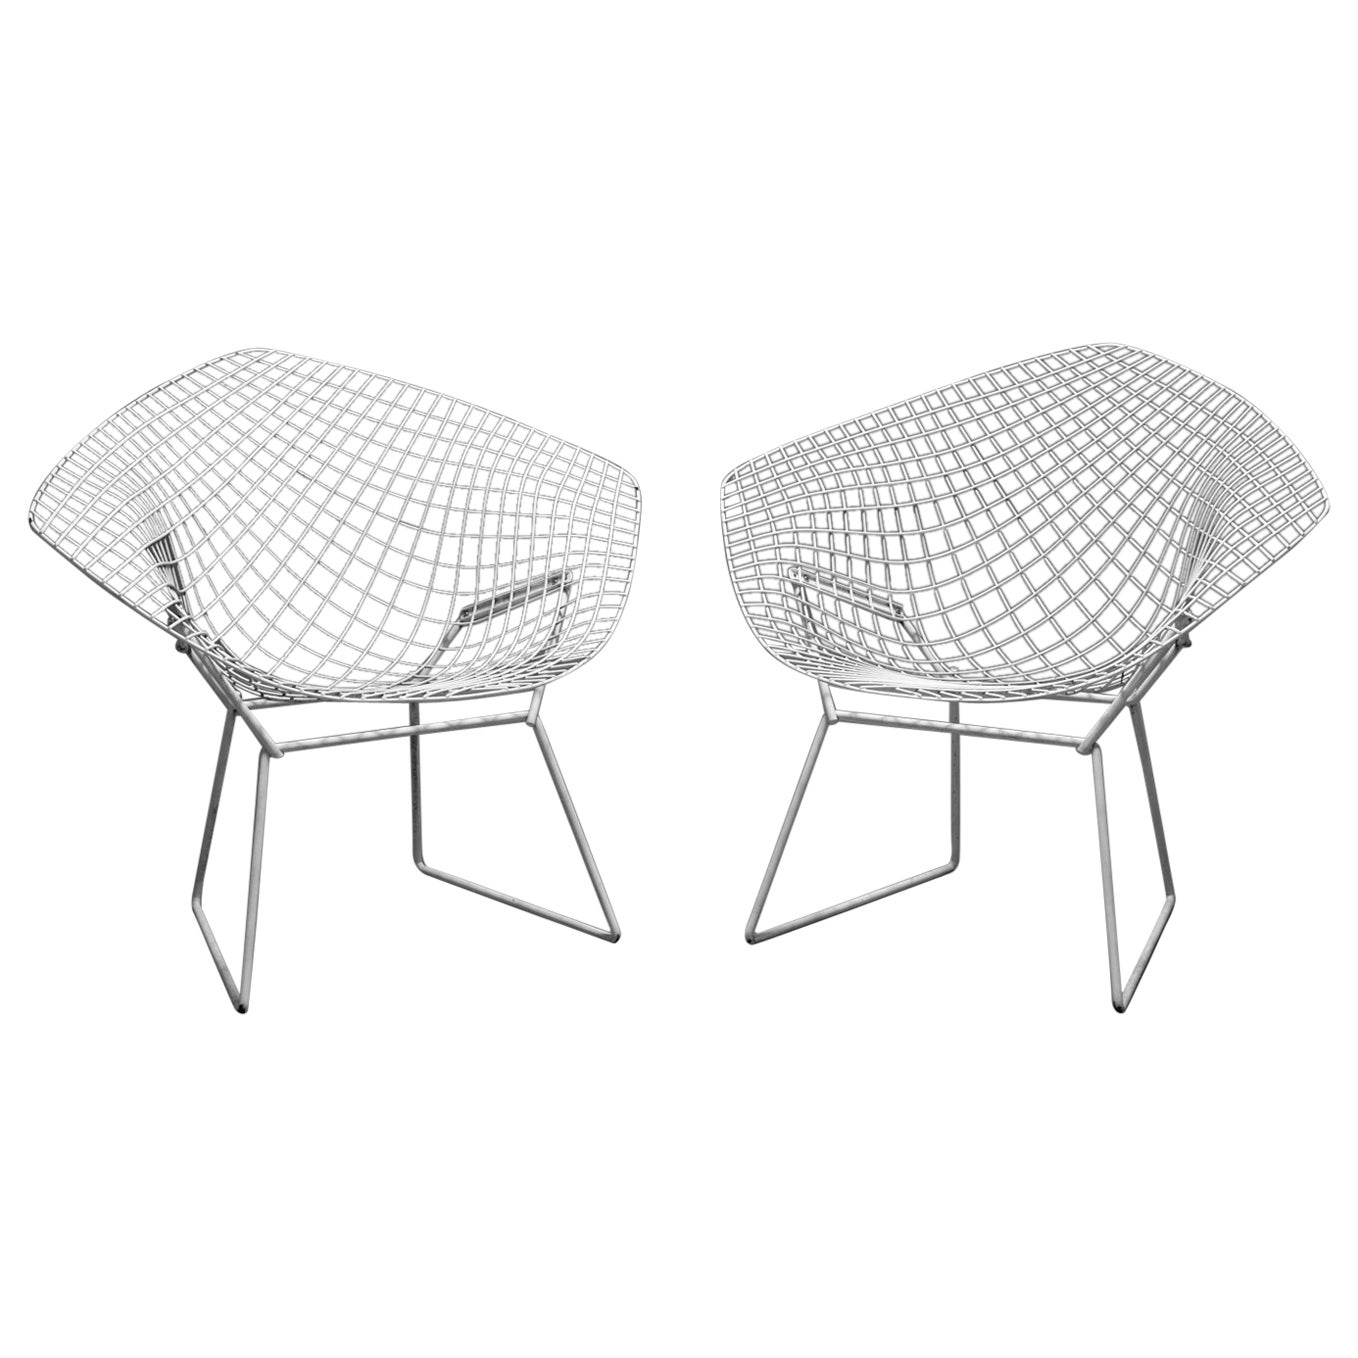 Bertoia Diamond Chairs, White, Set of Two, Welded & Painted Steel For Sale